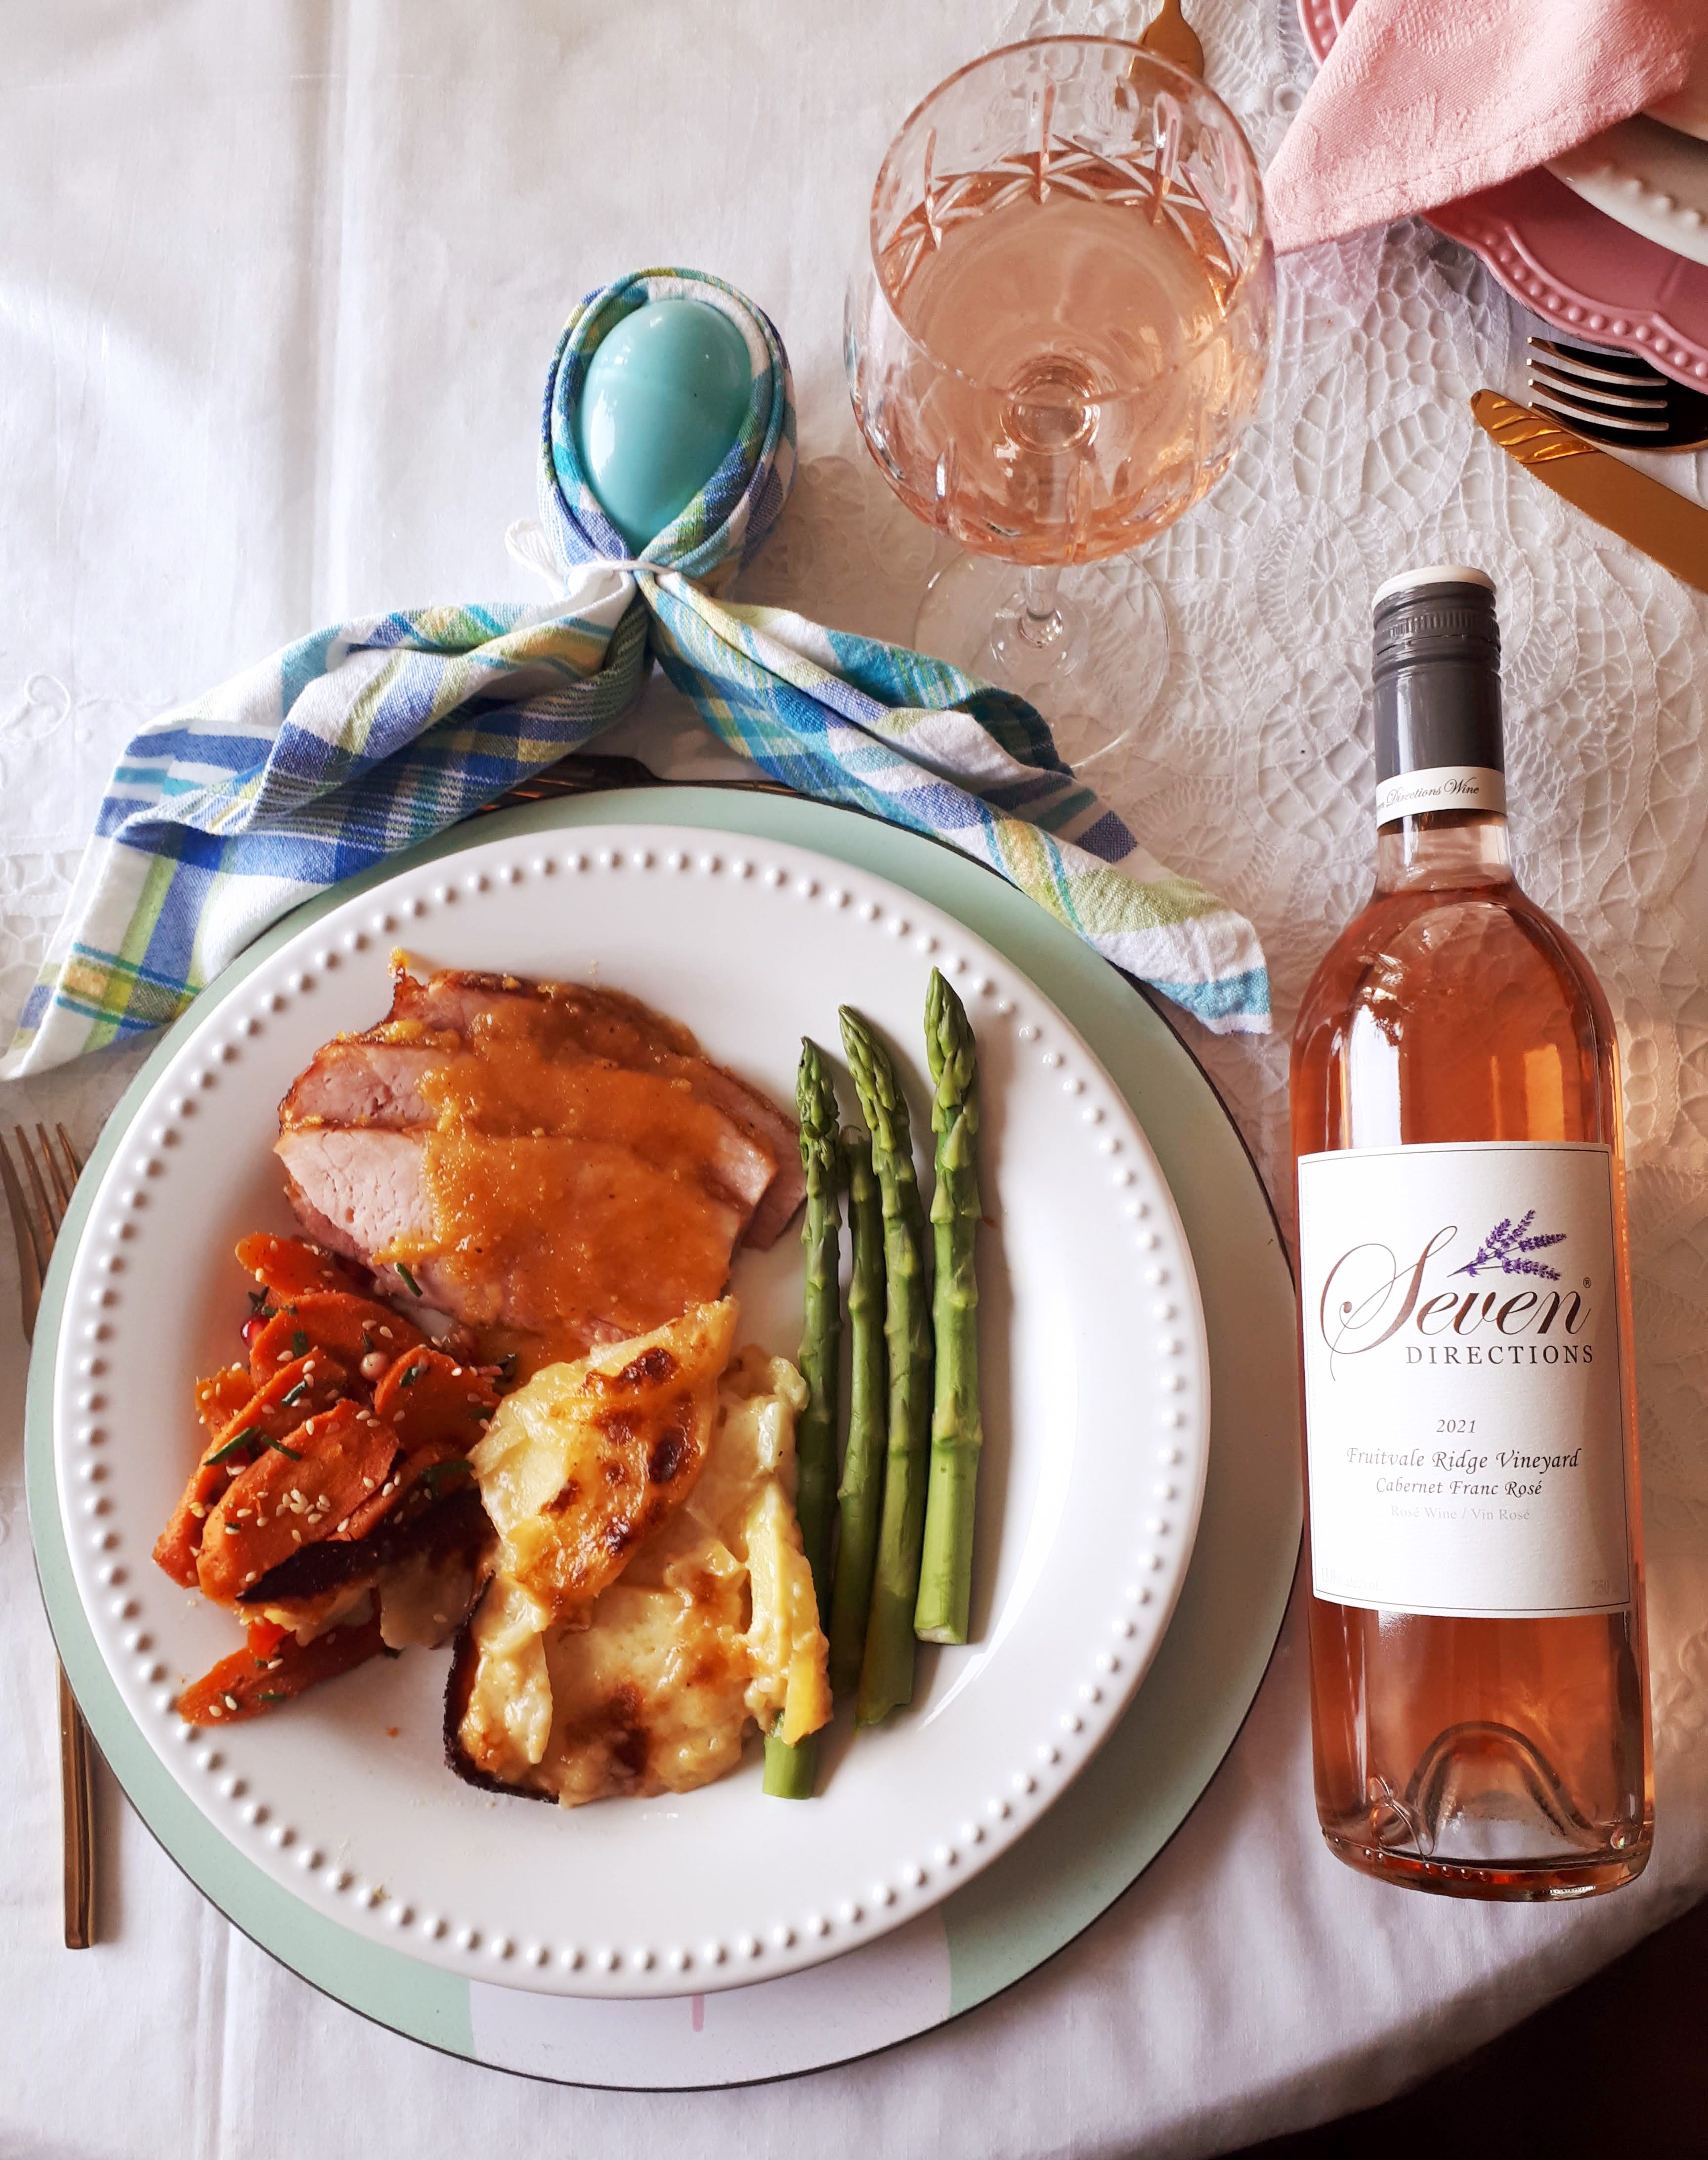 Seven Directions Fruitvale Ridge Vineyard Cabernet Franc Rosé with Ham, Maple syrup carrots and scalloped potatoes